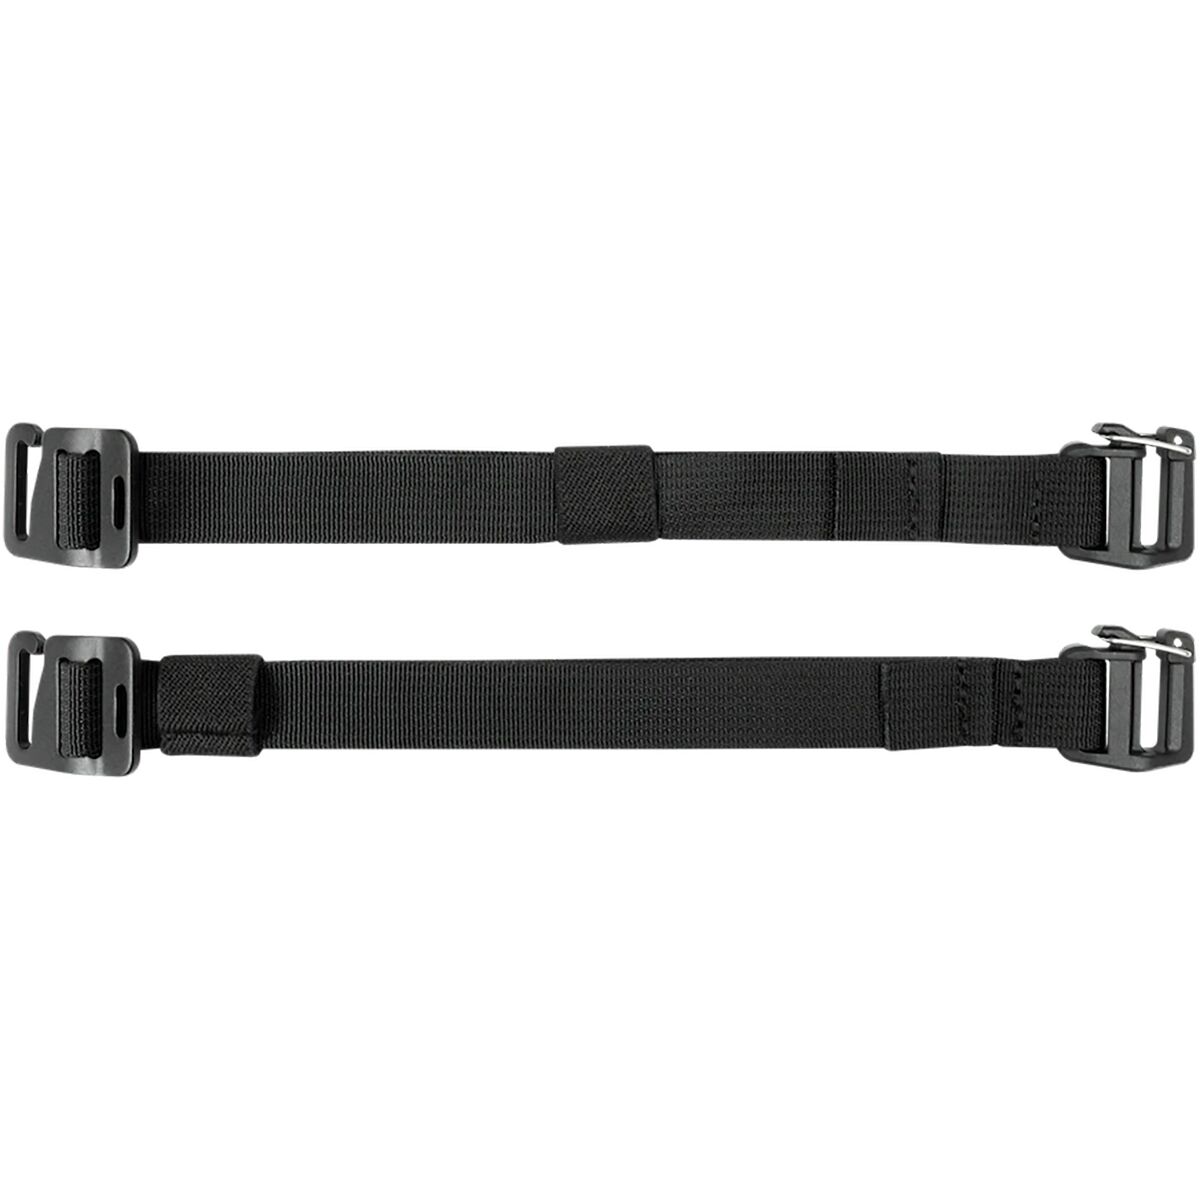 ABS Avalanche Rescue Devices A.Light - Snowboard Strap